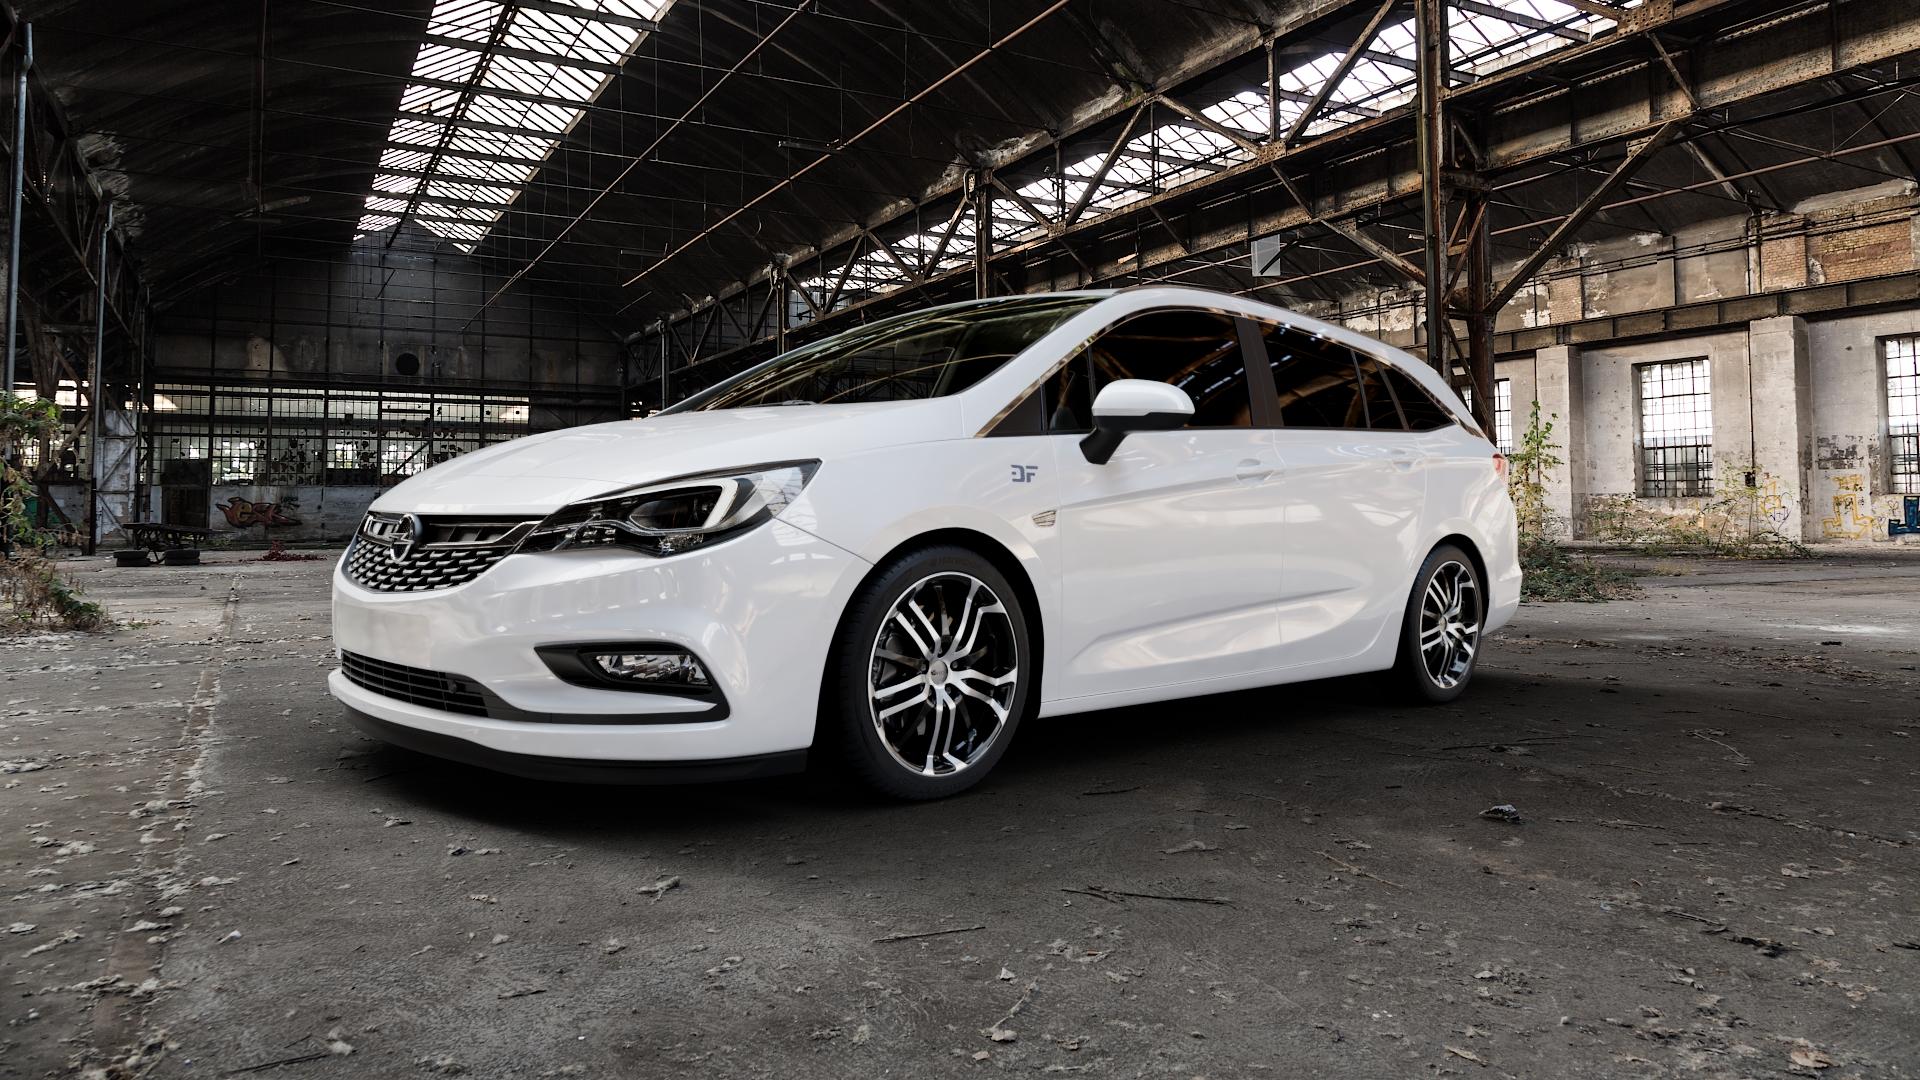 Opel Astra K Sports Tourer Type B-K 1,4l Turbo Ecotec 110kW (150 hp) Wheels  and Tyre Packages